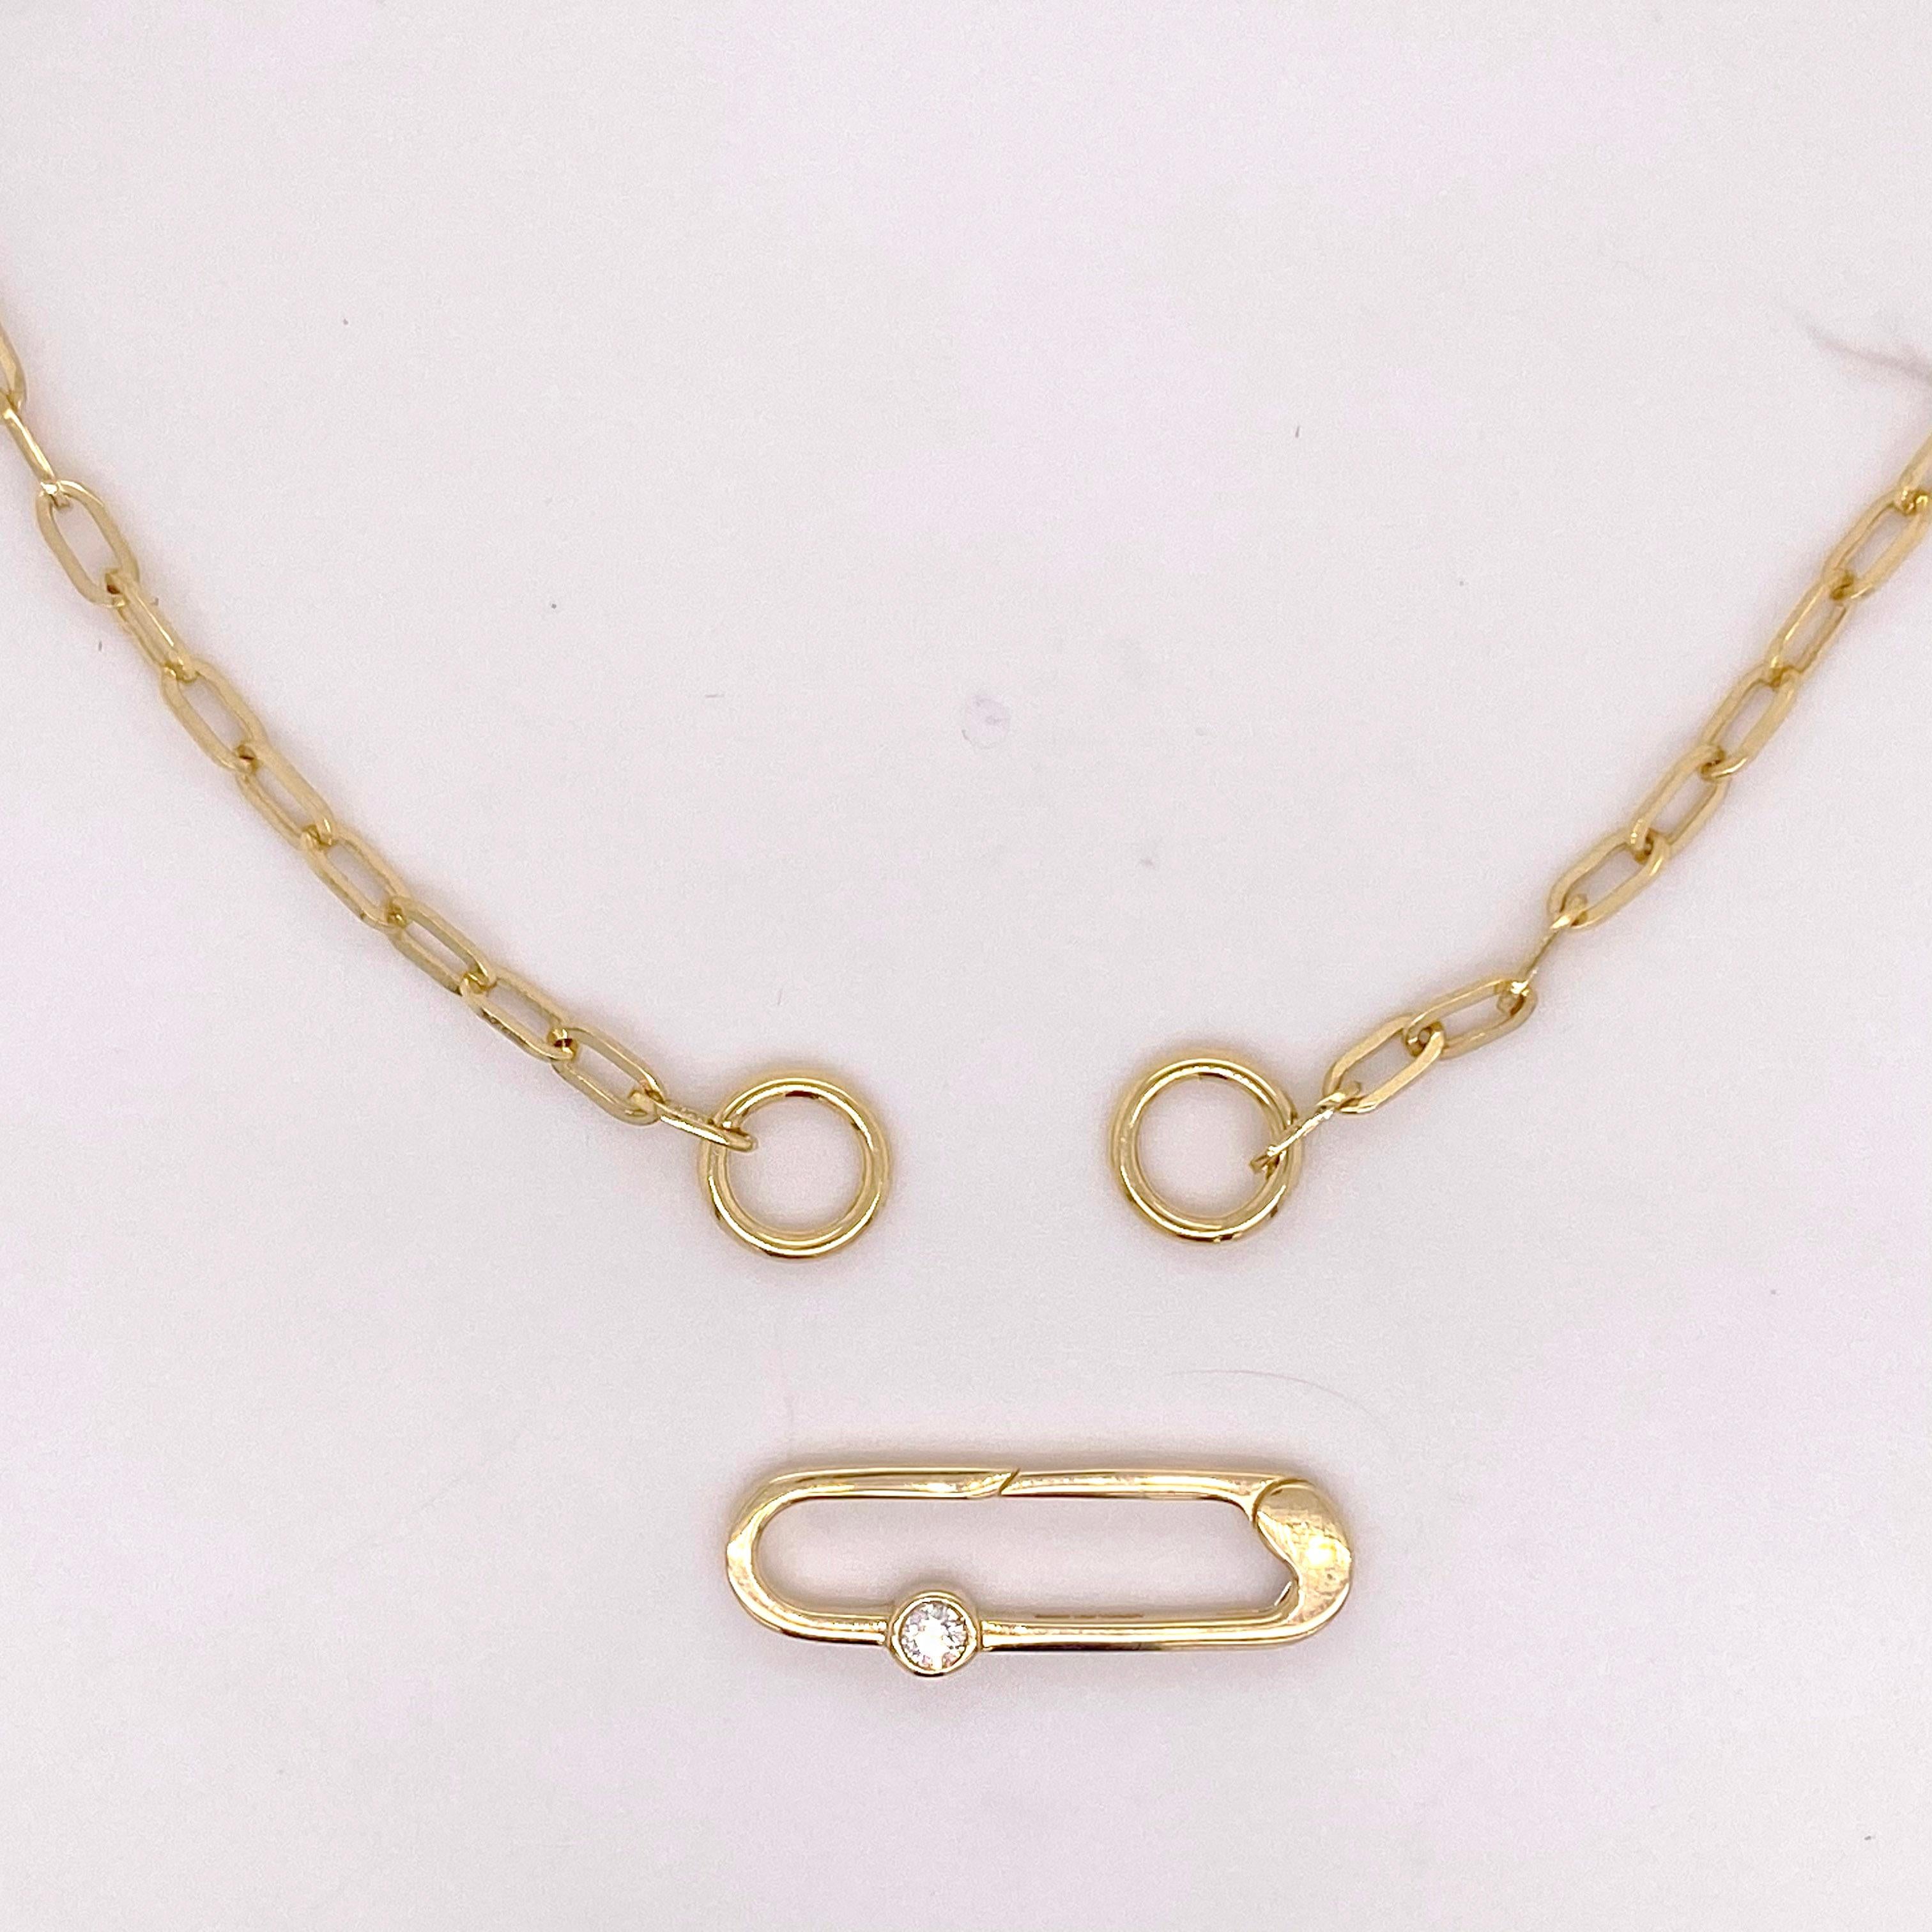 gold paperclip charm necklace